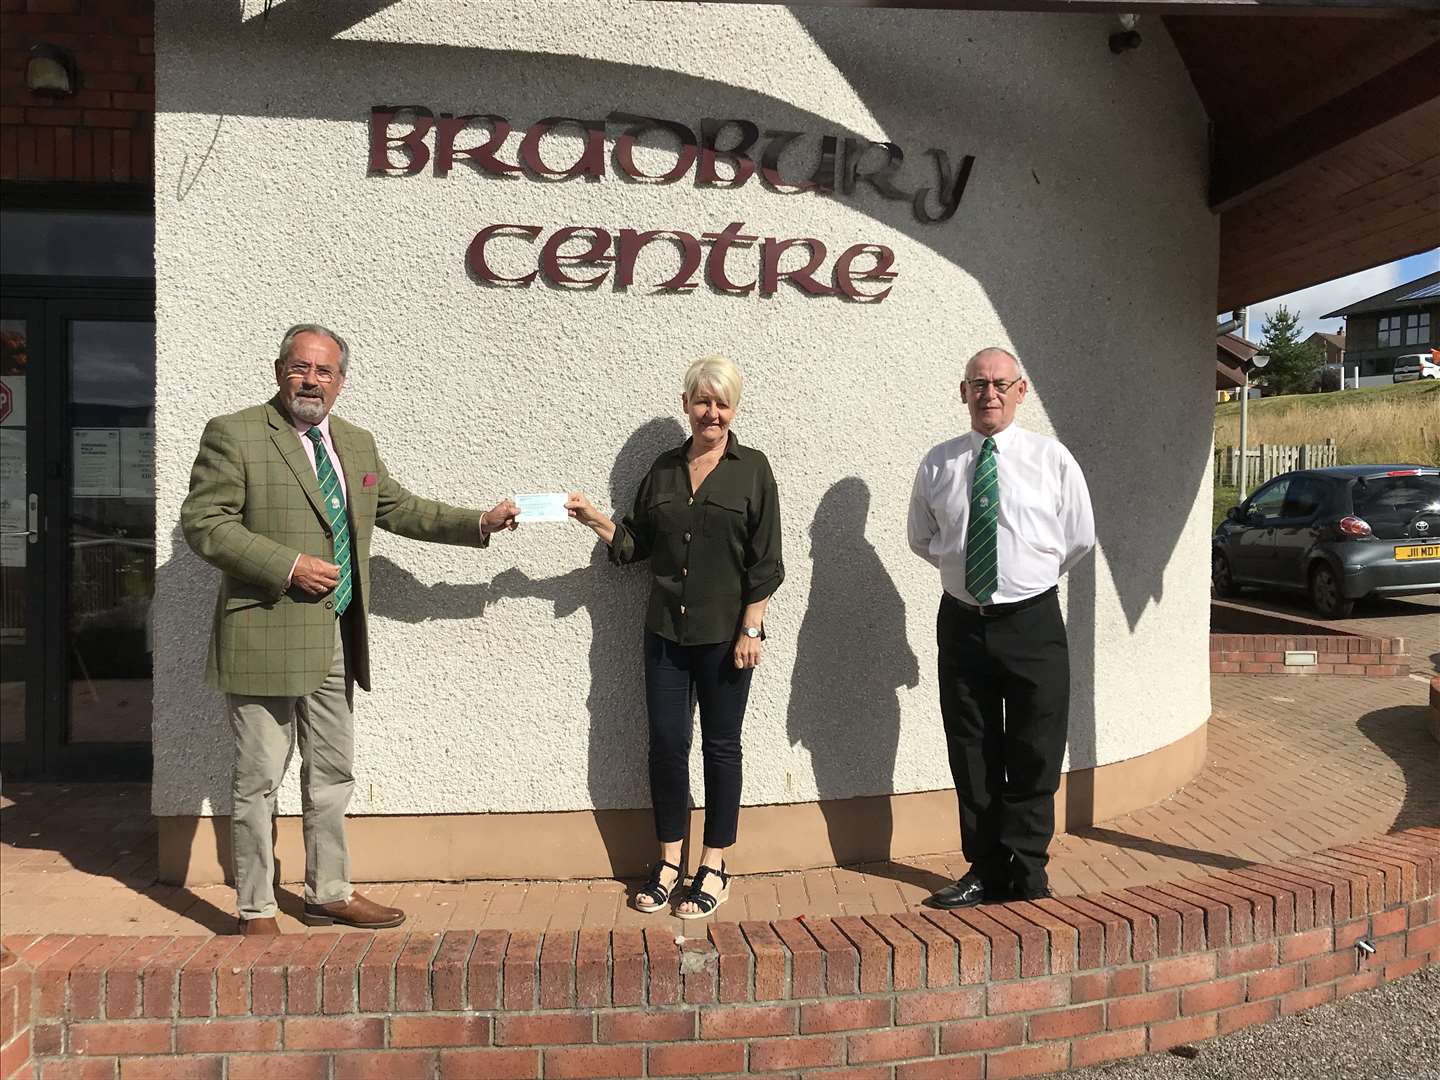 Presenting the cheque to Lorraine Askew, the centre manager, is David Collings, recently appointed Provincial Grand Master of Sutherland accompanied by David Macdonald, his Provincial Grand Secretary.